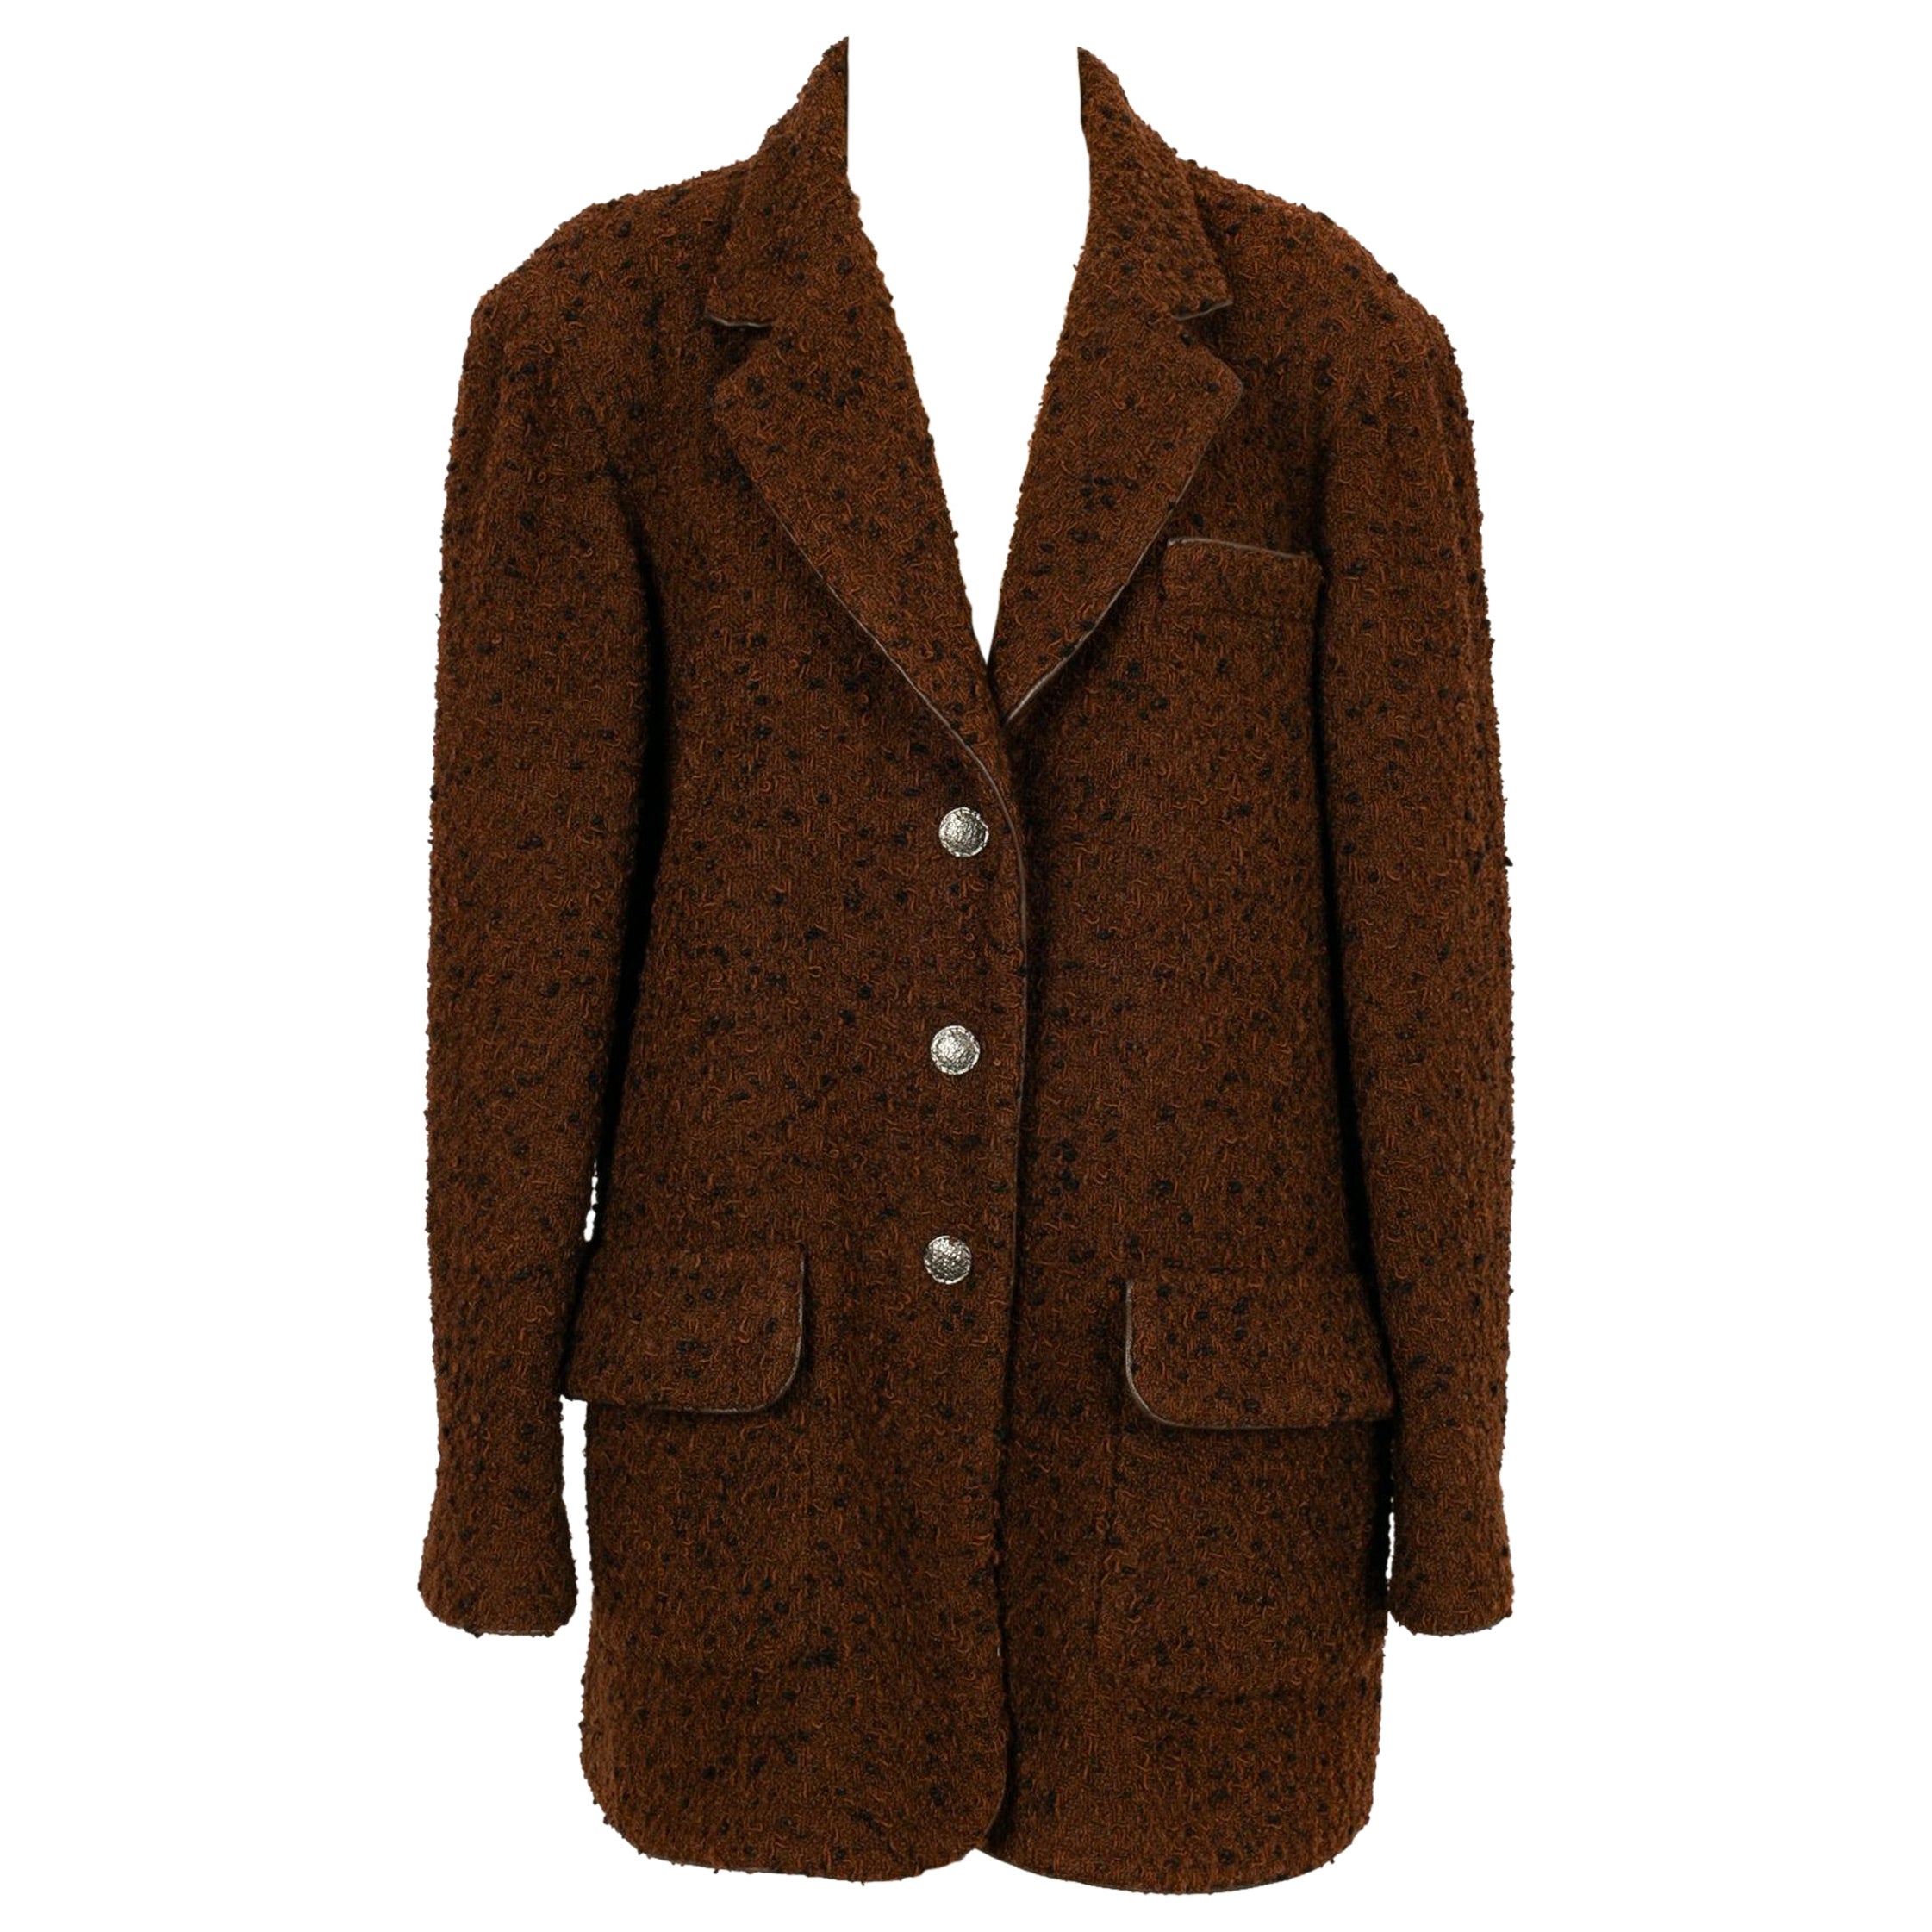 Chanel Jacket in Brown-Wool Tweed with Silk Lining, 1997 For Sale